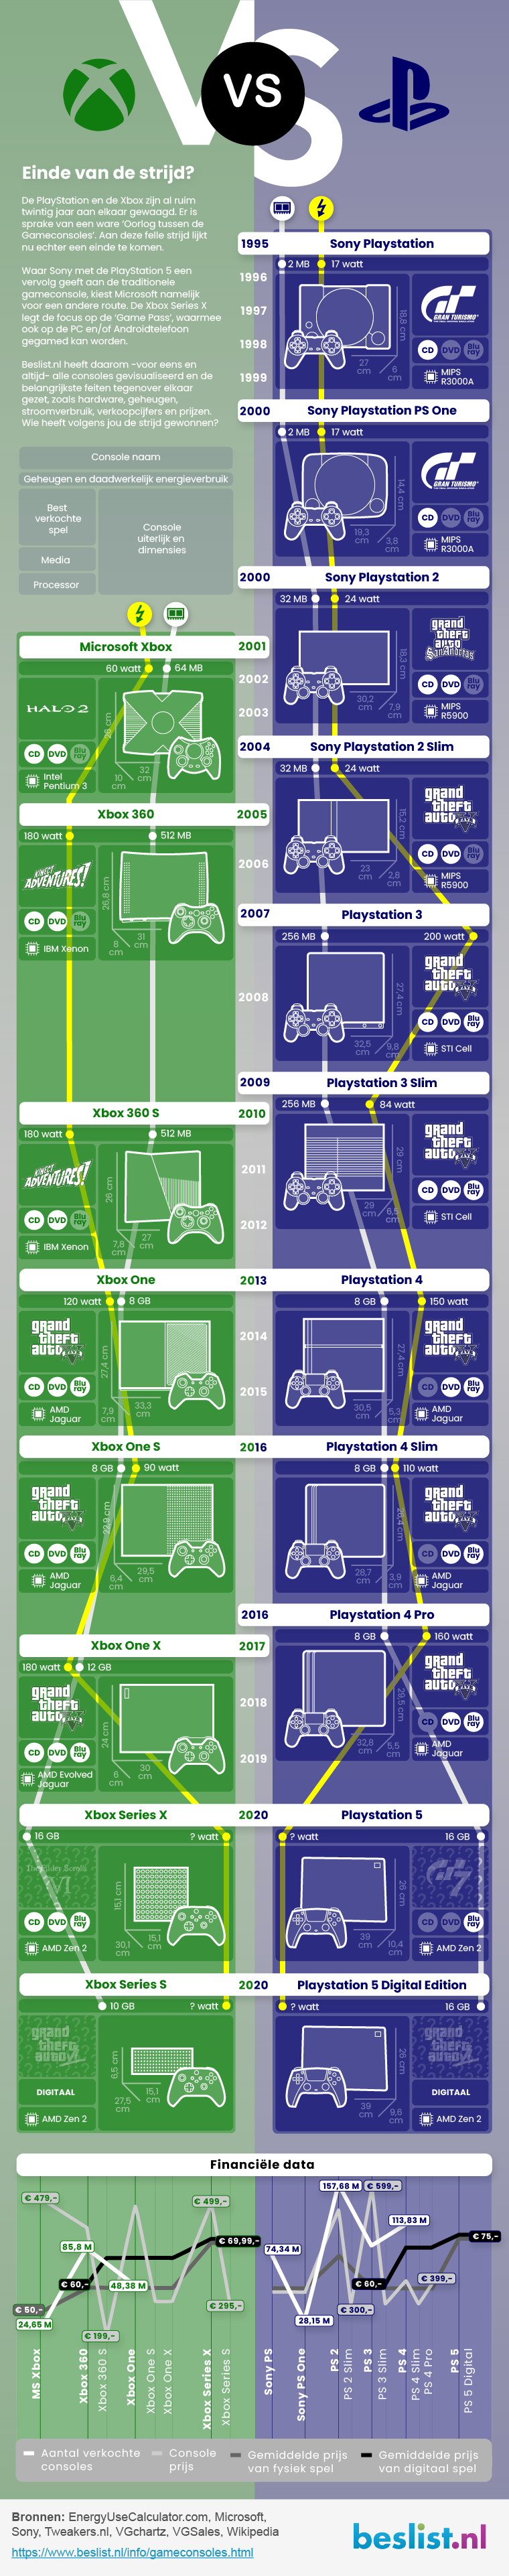 Infographic Gameconsoles - PlayStation vs. Xbox